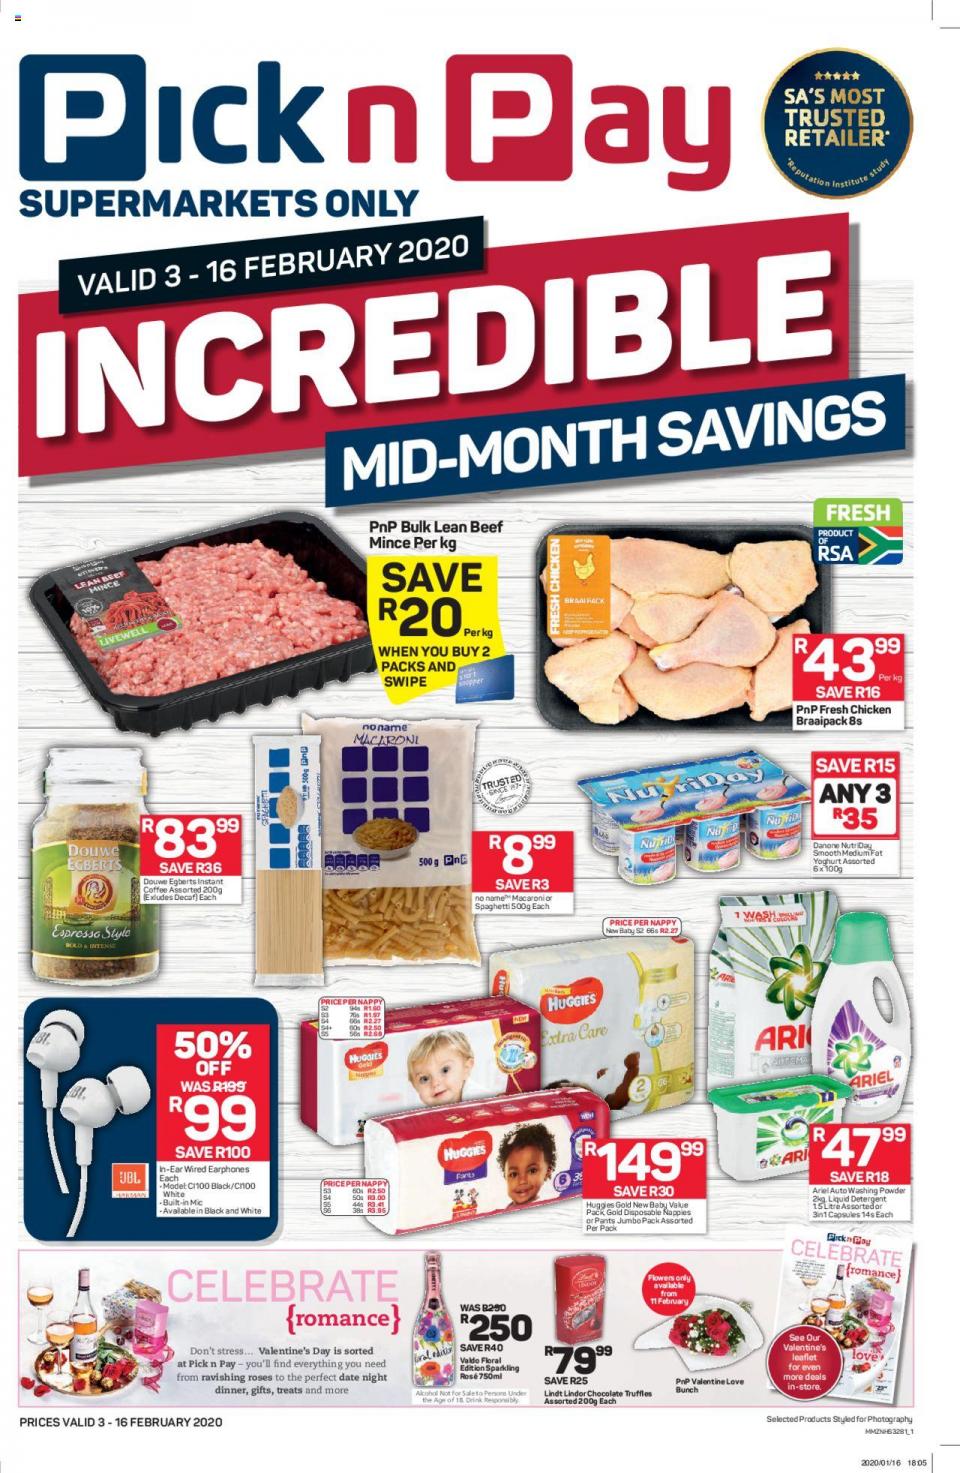 Pick n Pay Specials Incredible Mid-Month Savings 3 February 2020